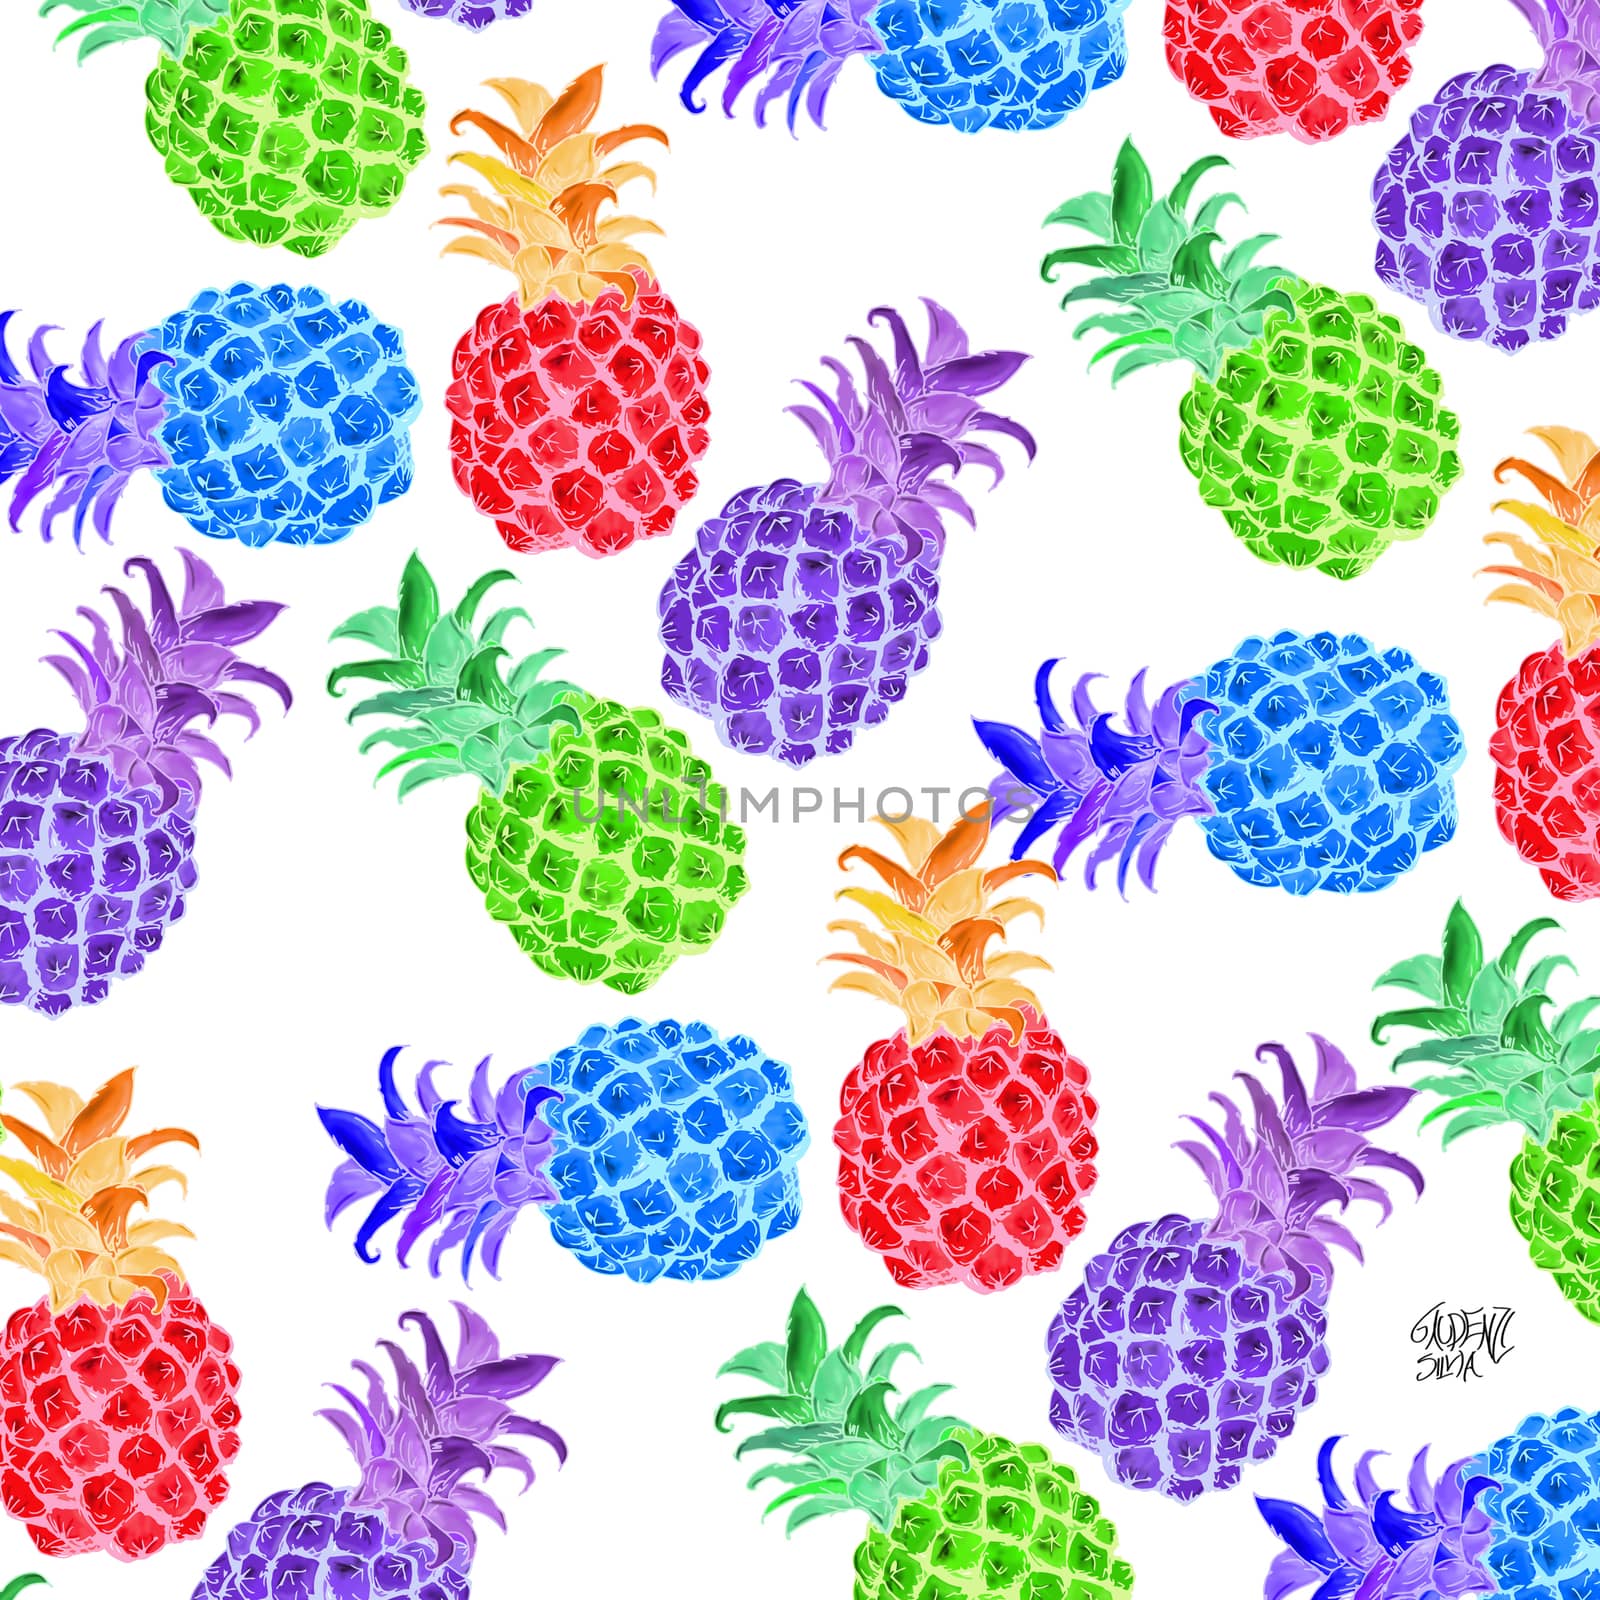 pineapple drawn in color with white background







fabrics with color drawn pineapple with colored